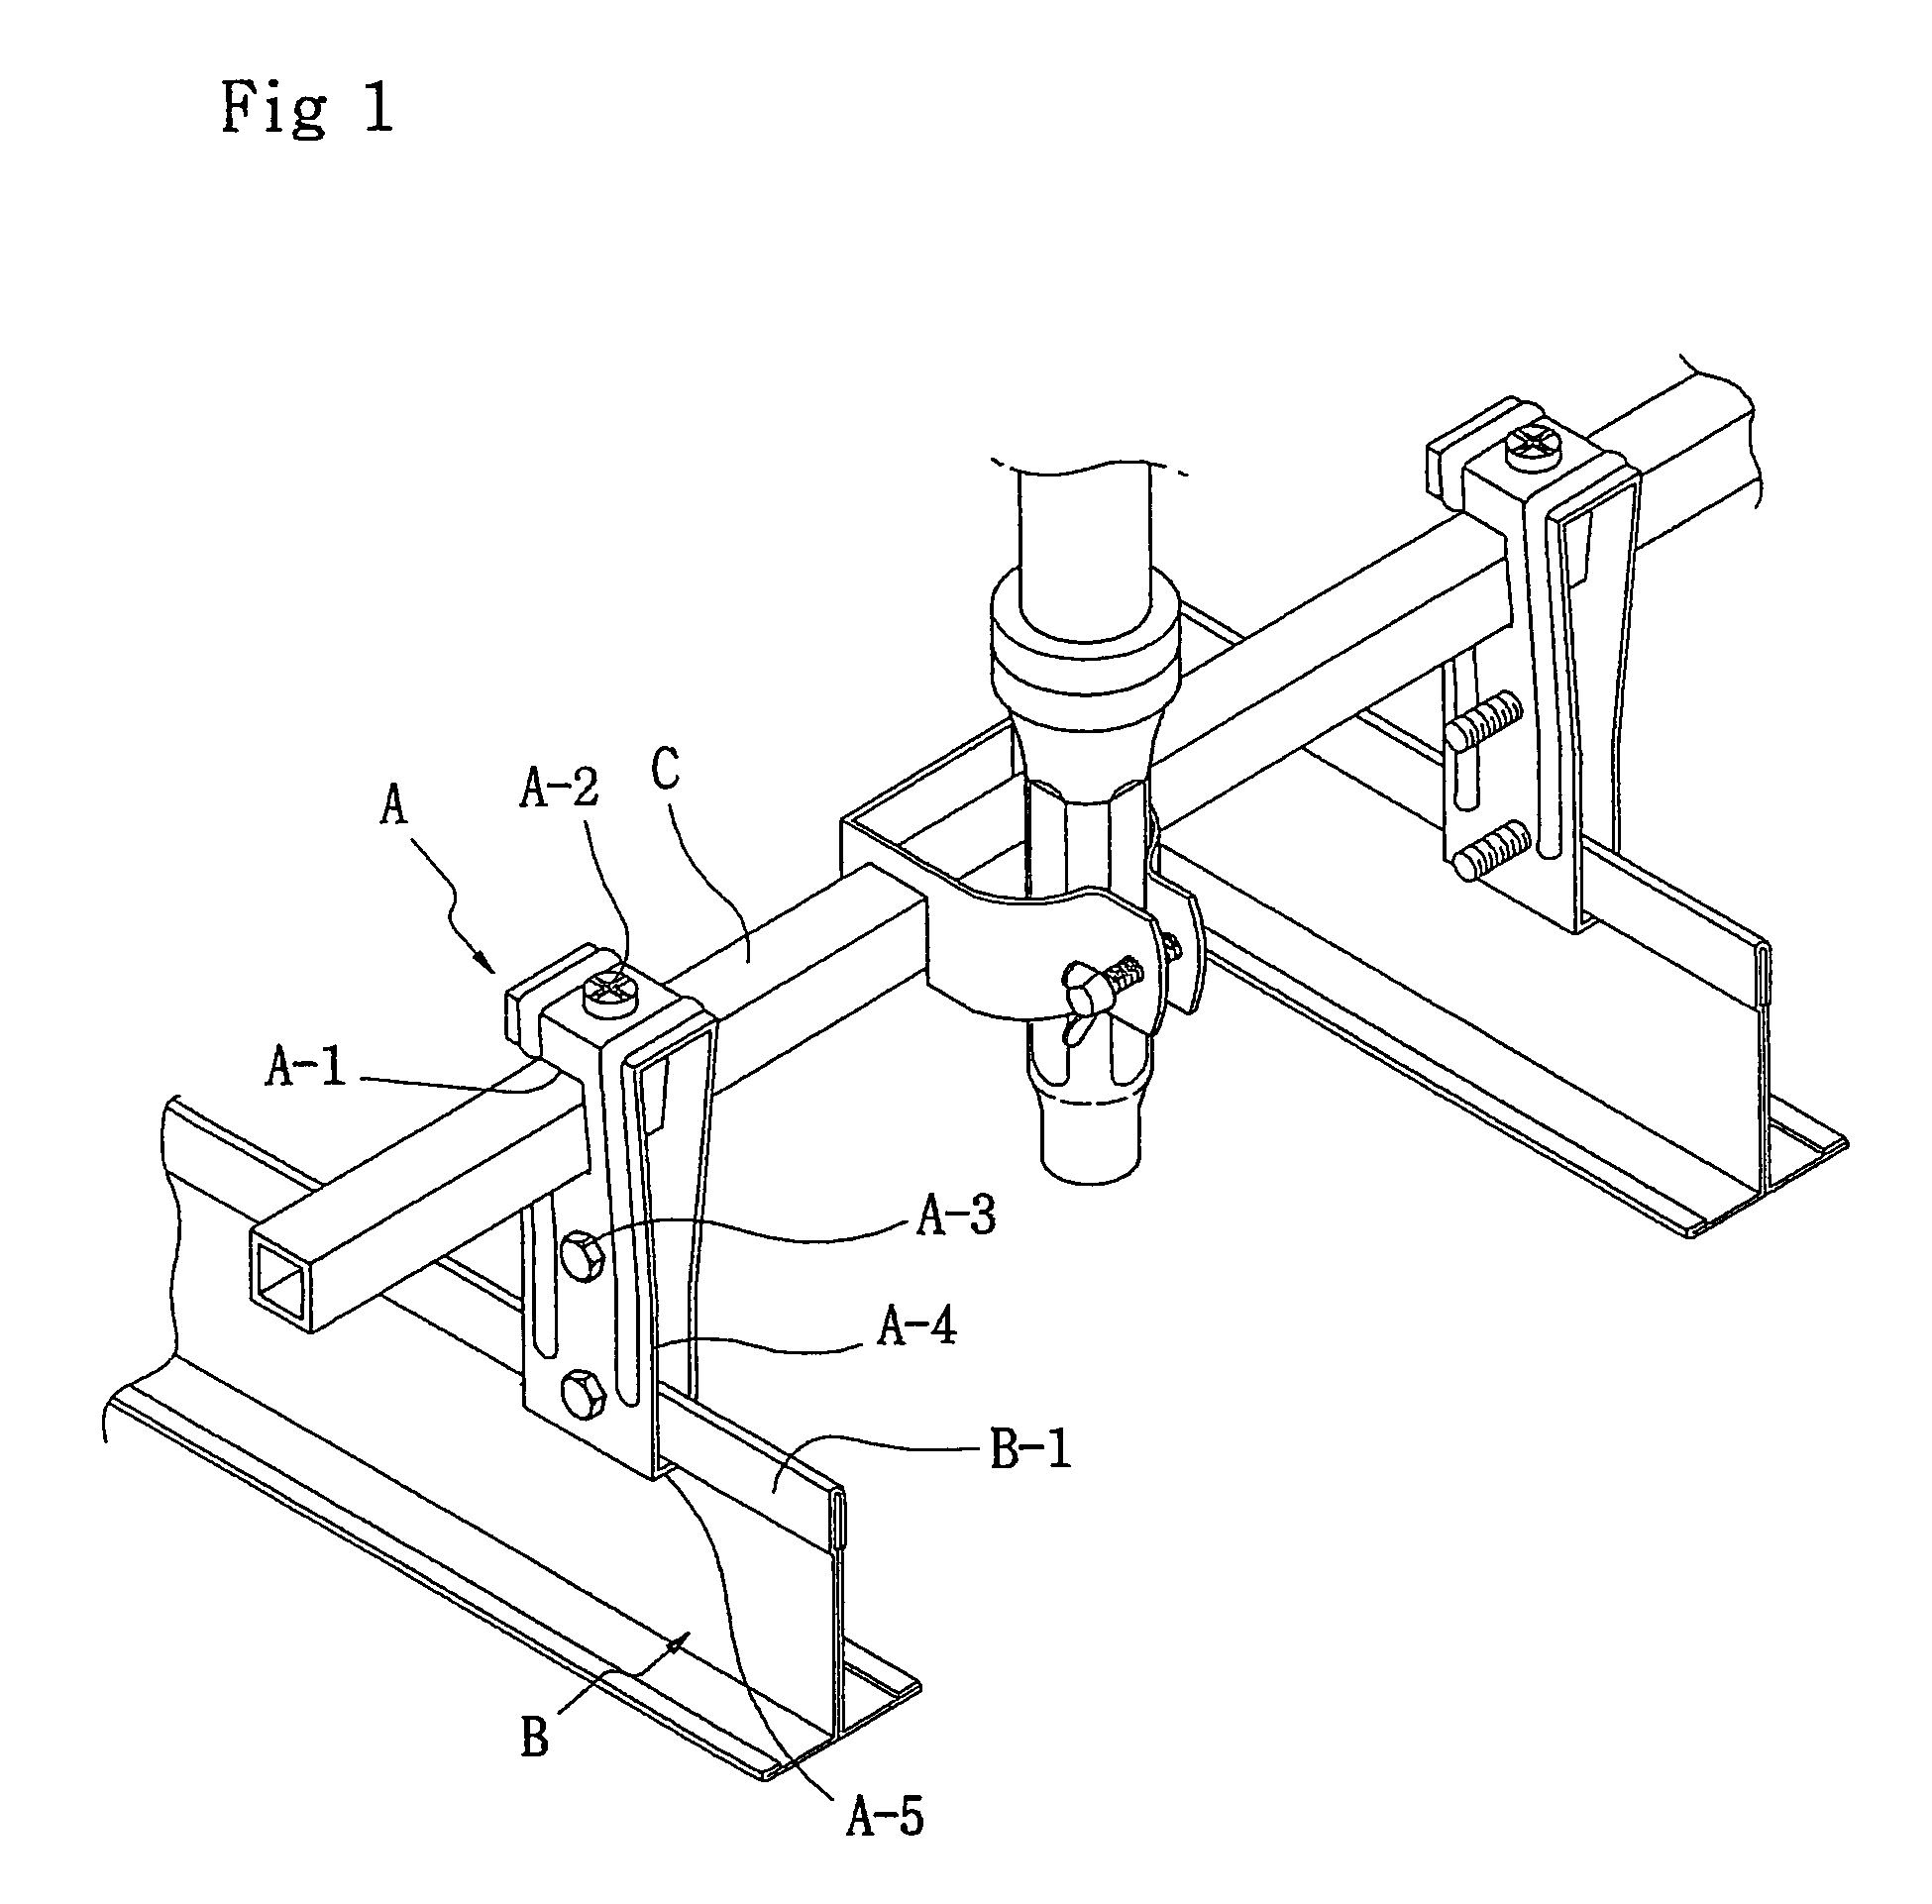 Stock bar and horizontal bar coupling device for mounting sprinkler